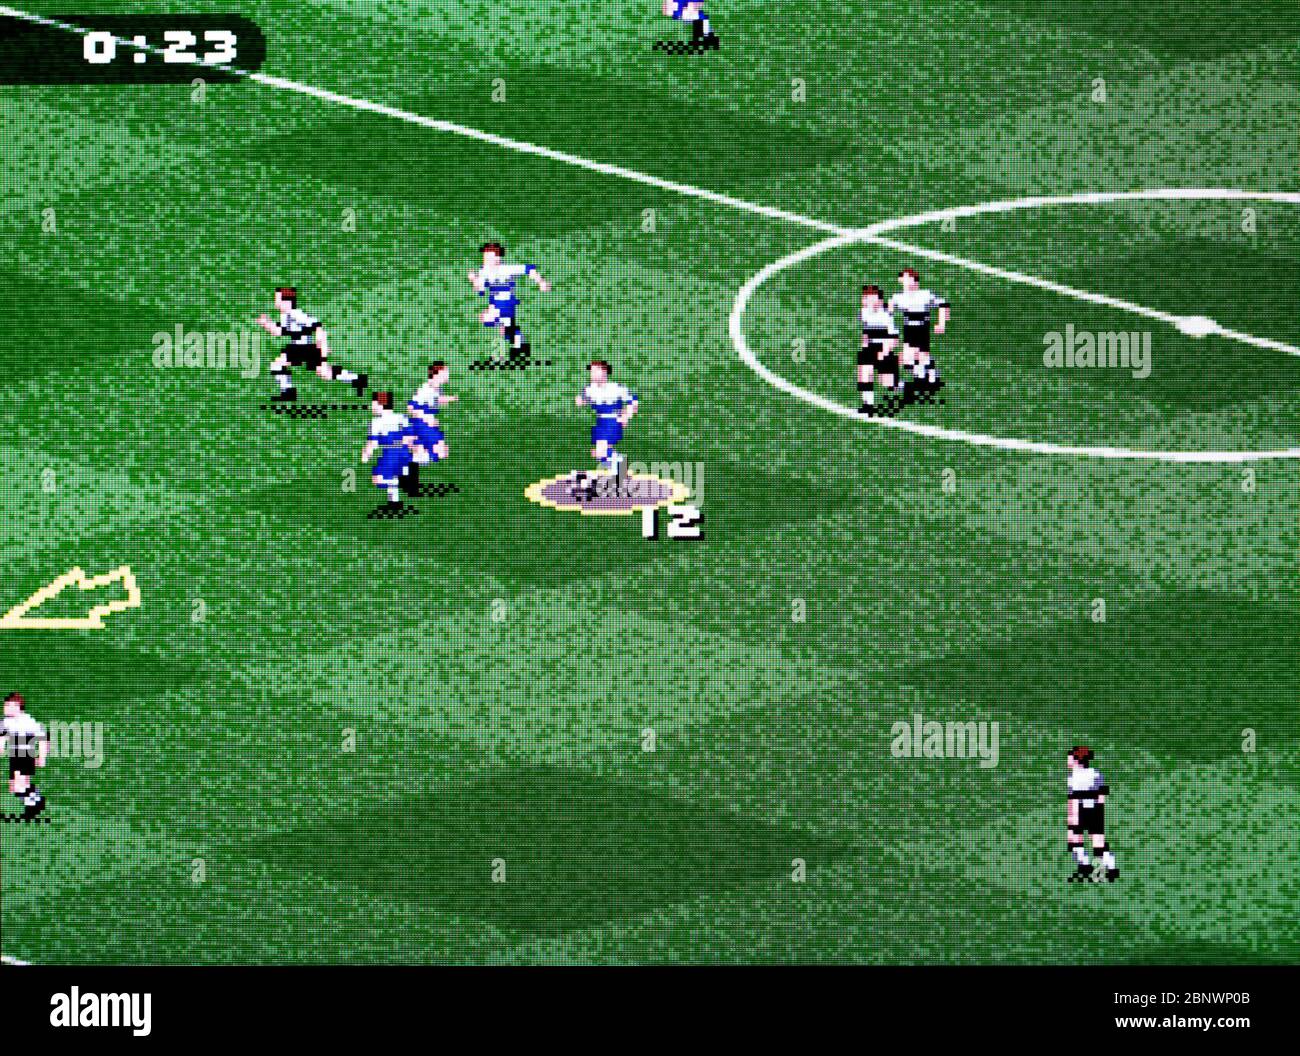 Fifa 97 High Resolution Stock Photography and Images - Alamy